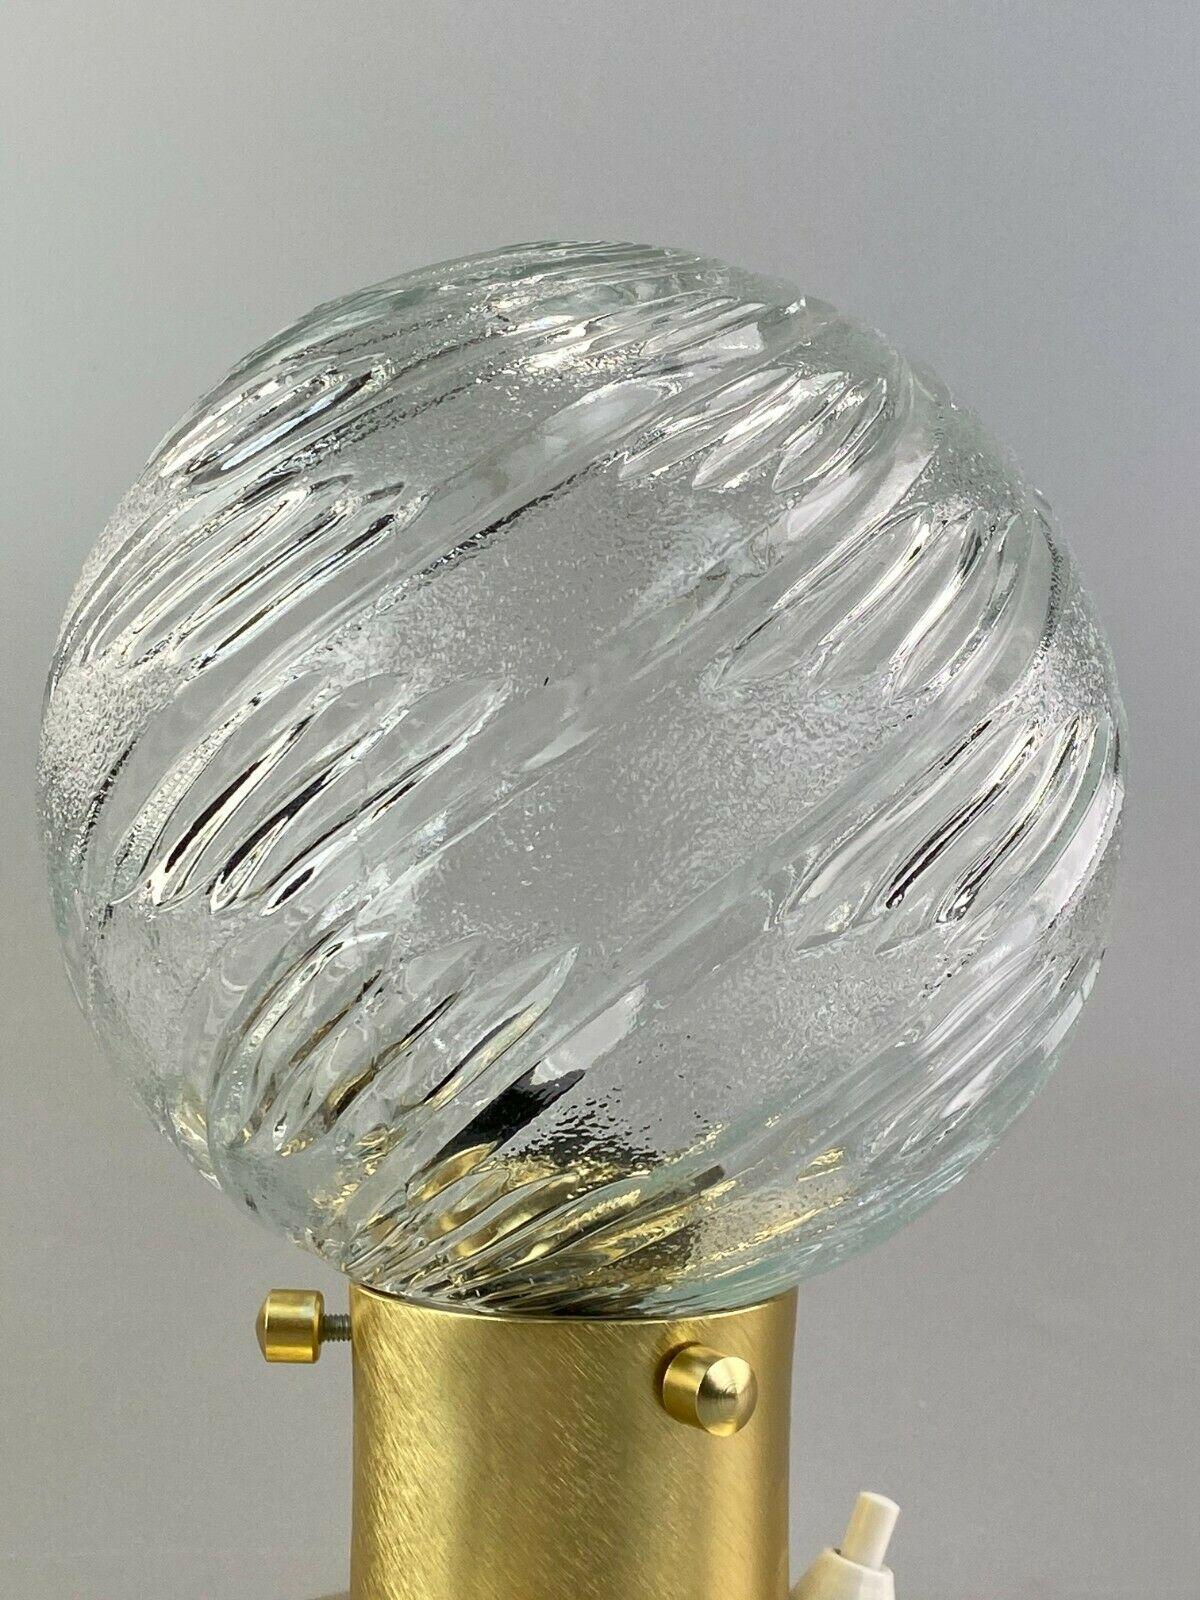 60s 70s Ball Lamp Light Table Lamp Bedside Lamp Space Age Design For Sale 2